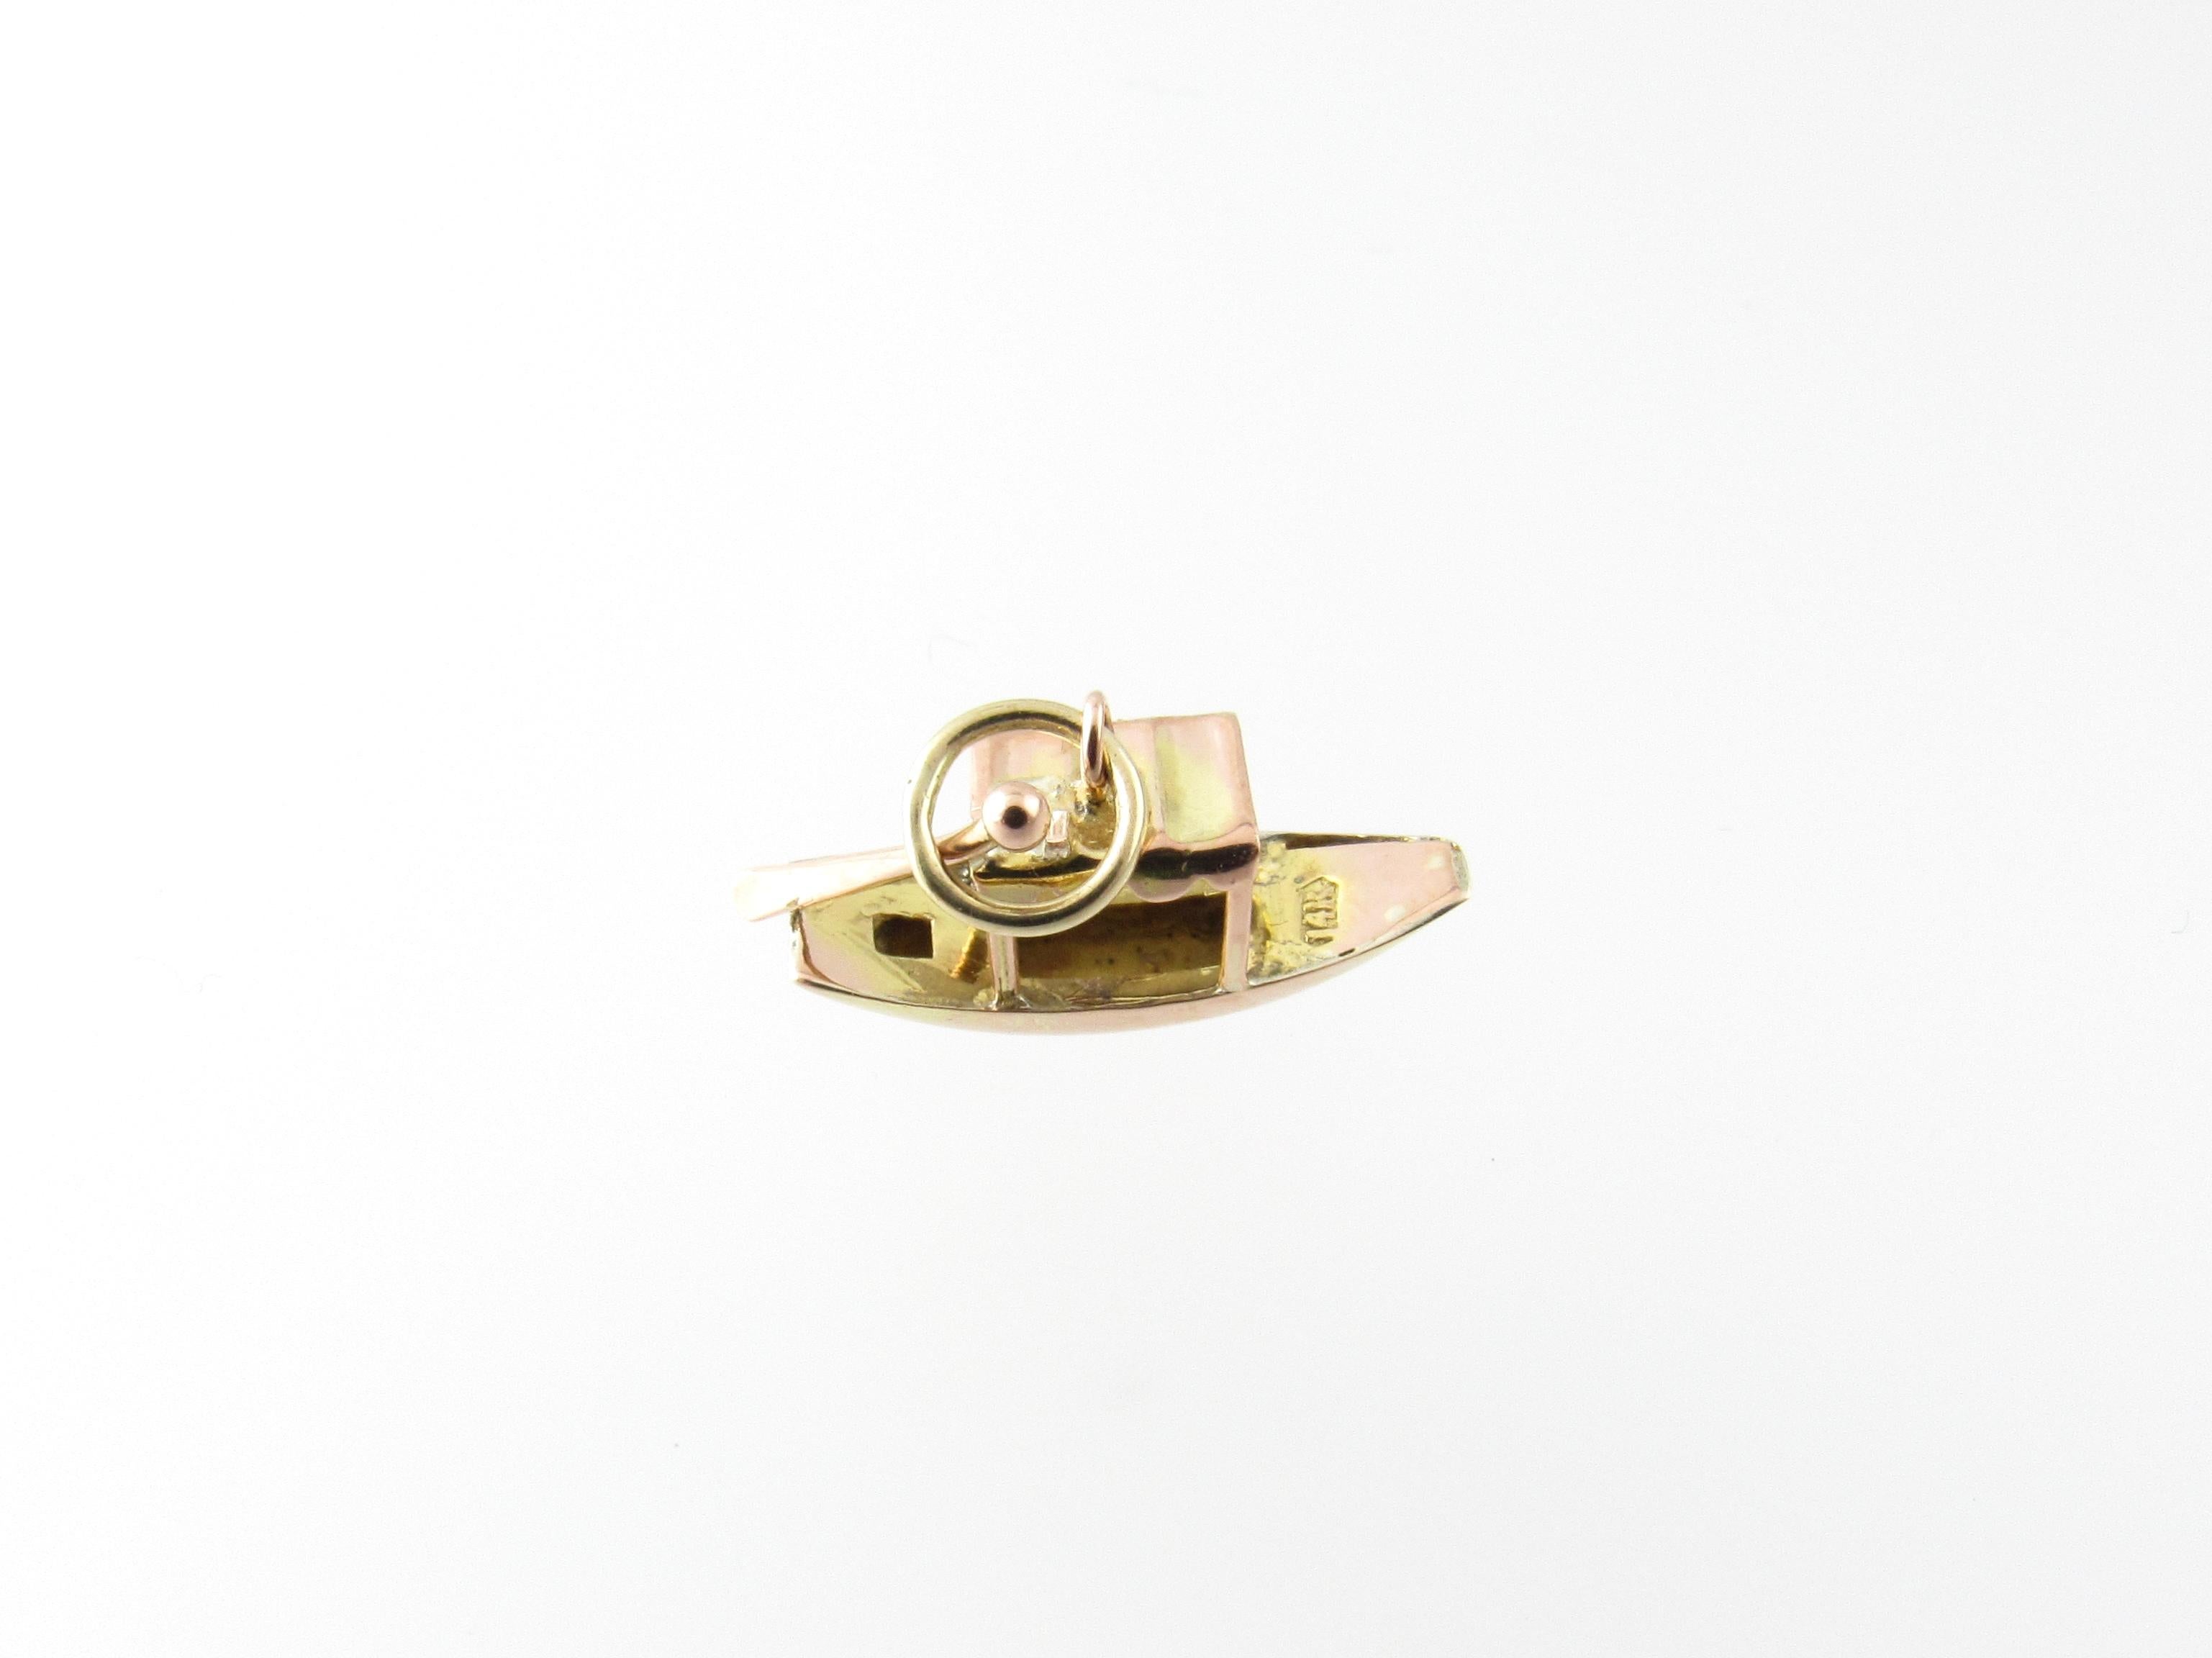 Vintage 14 Karat Yellow and Rose Gold Fishing Boat Charm

This lovely charm features a 3D fishing boat meticulously detailed in 14K yellow gold.

Size: 10 mm x 19 mm (actual charm)

Weight: 0.6 dwt. / 1.0 gr.

Stamped: 14K

Very good condition,